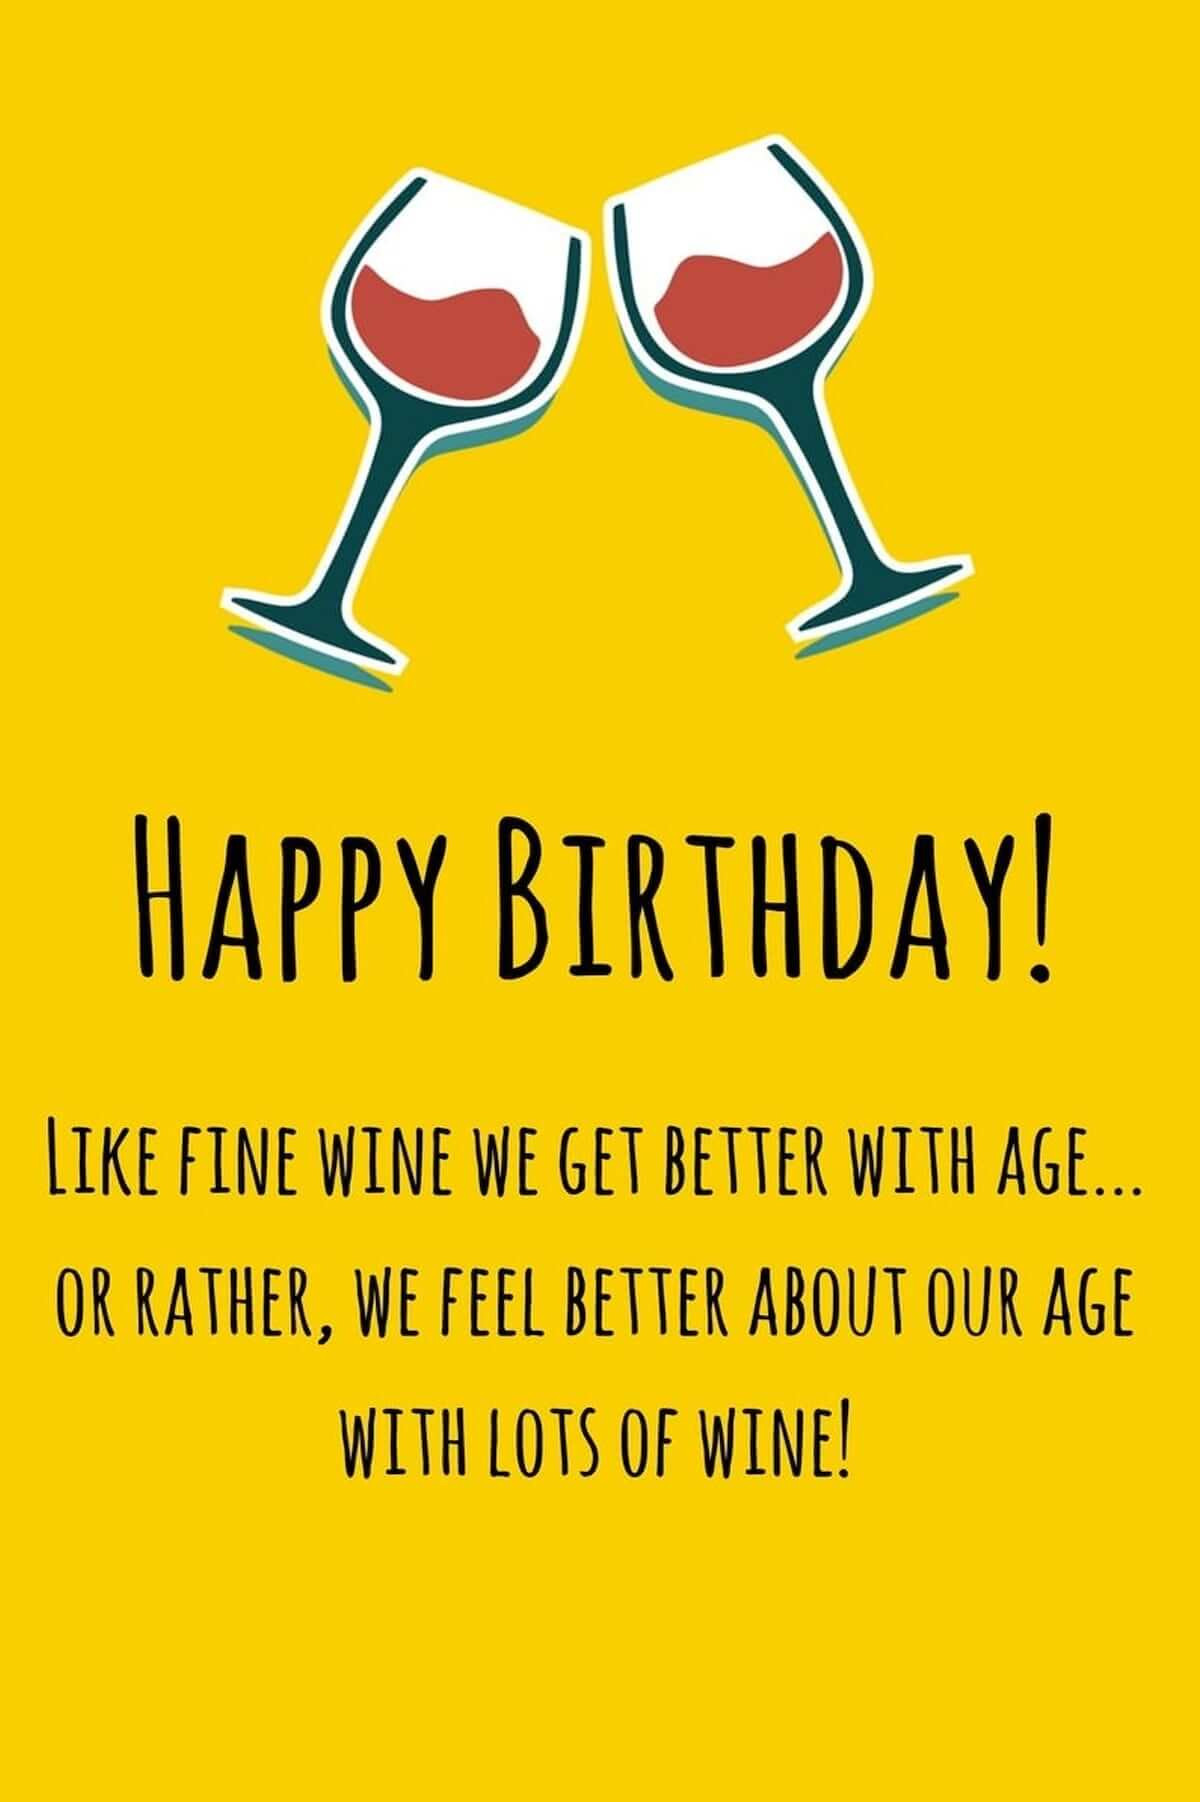 Birthday Wishes To A Friend Funny
 200 Funny Happy Birthday Wishes Quotes Ever